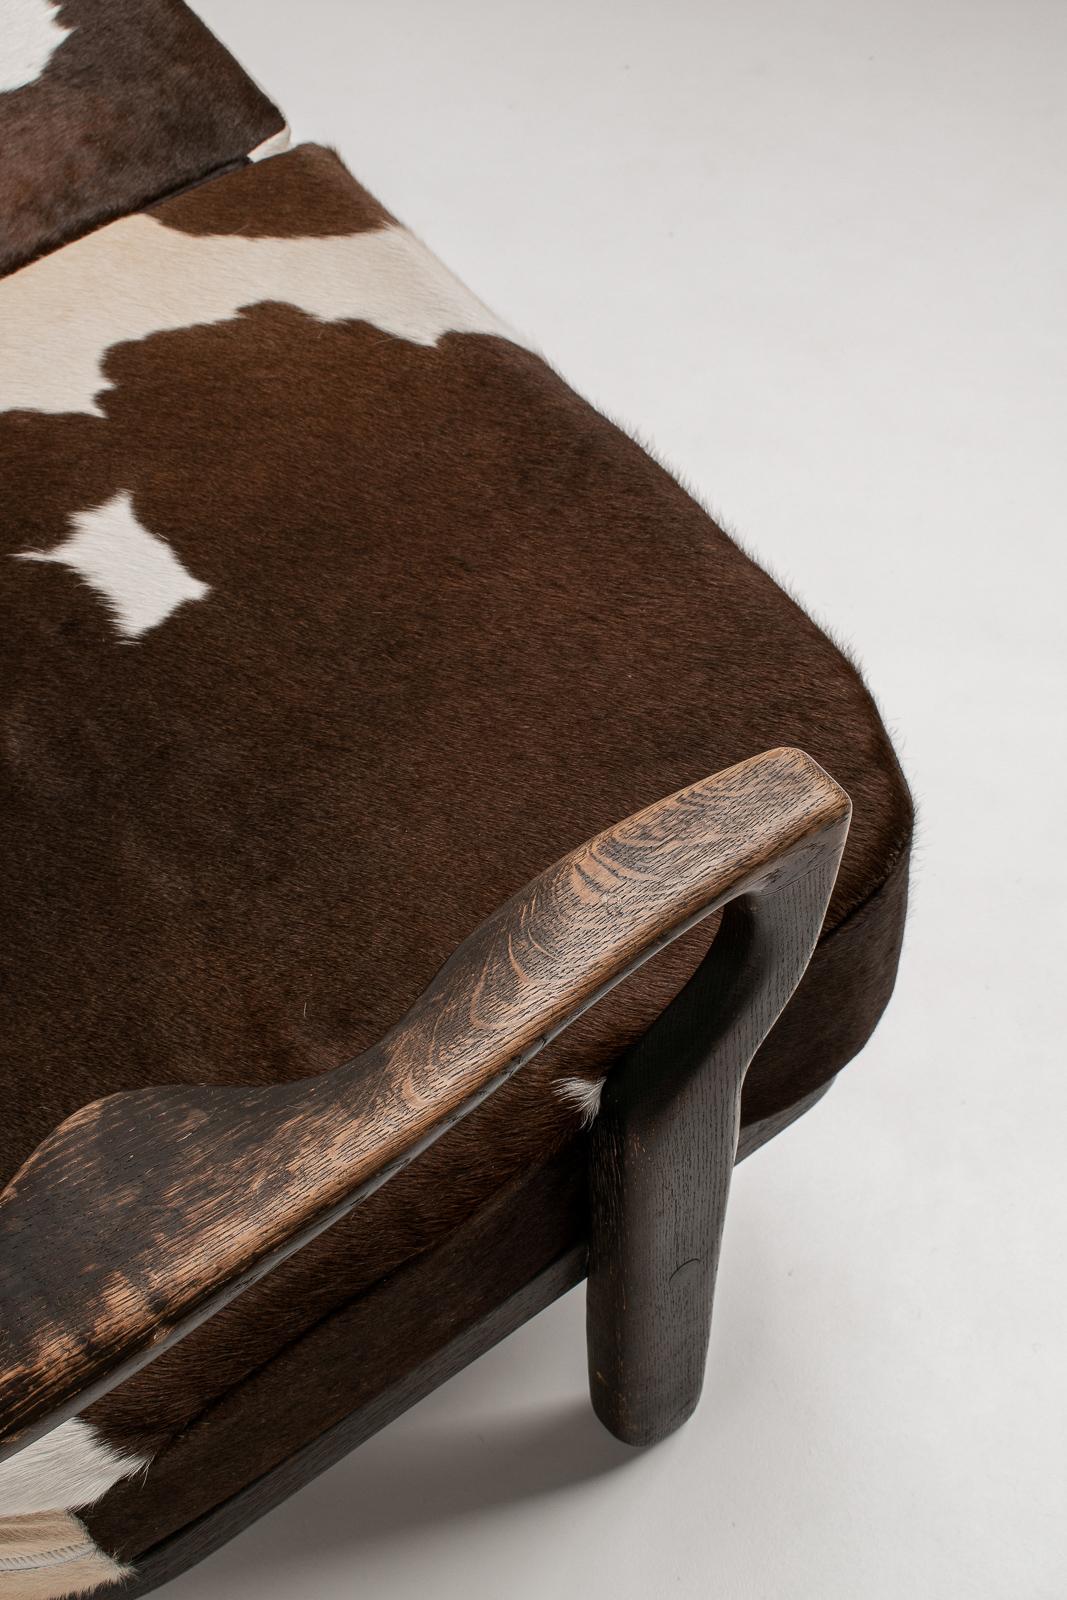 'Juliette' Sofa by Guillerme et Chambron in Solid Stained Oak and Cowhide, 1950s For Sale 3